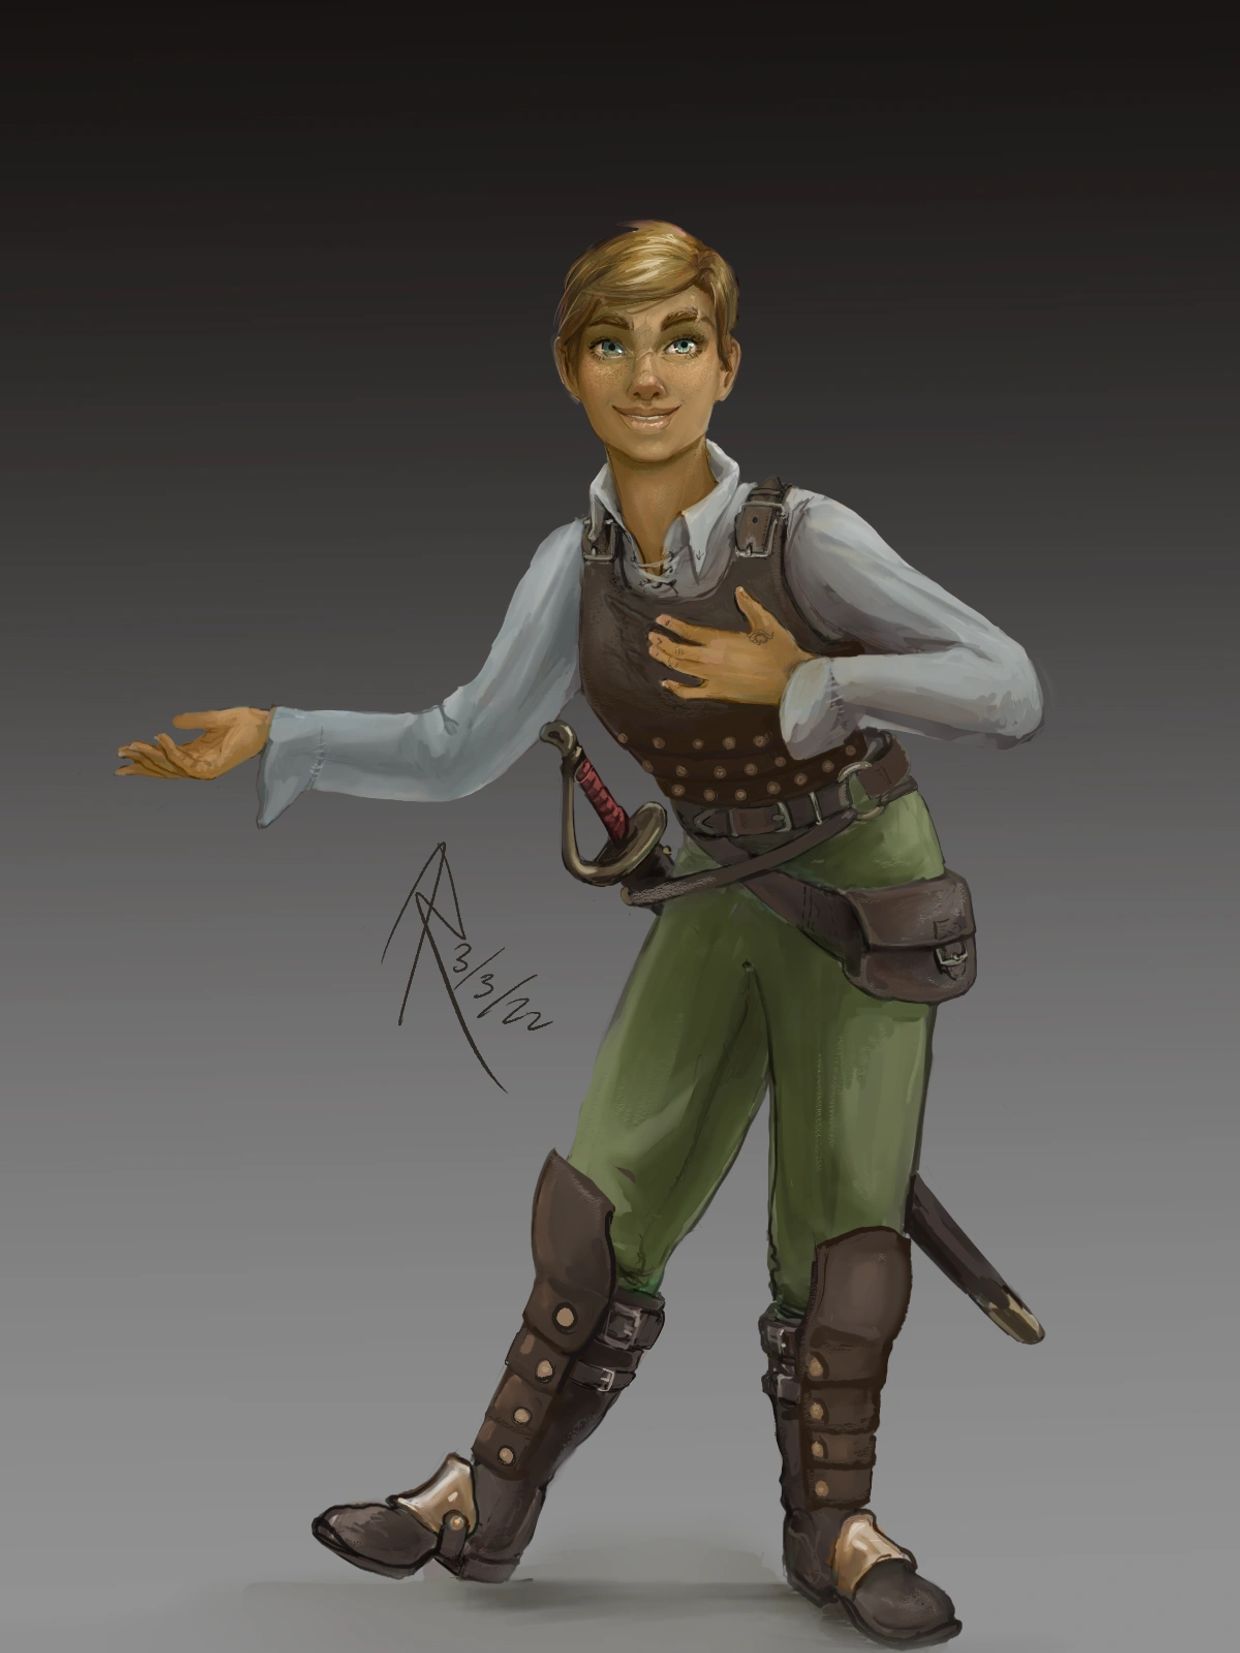 a human swashbuckler rogue from the dungeons and dragons live stream Adventures in Alberon